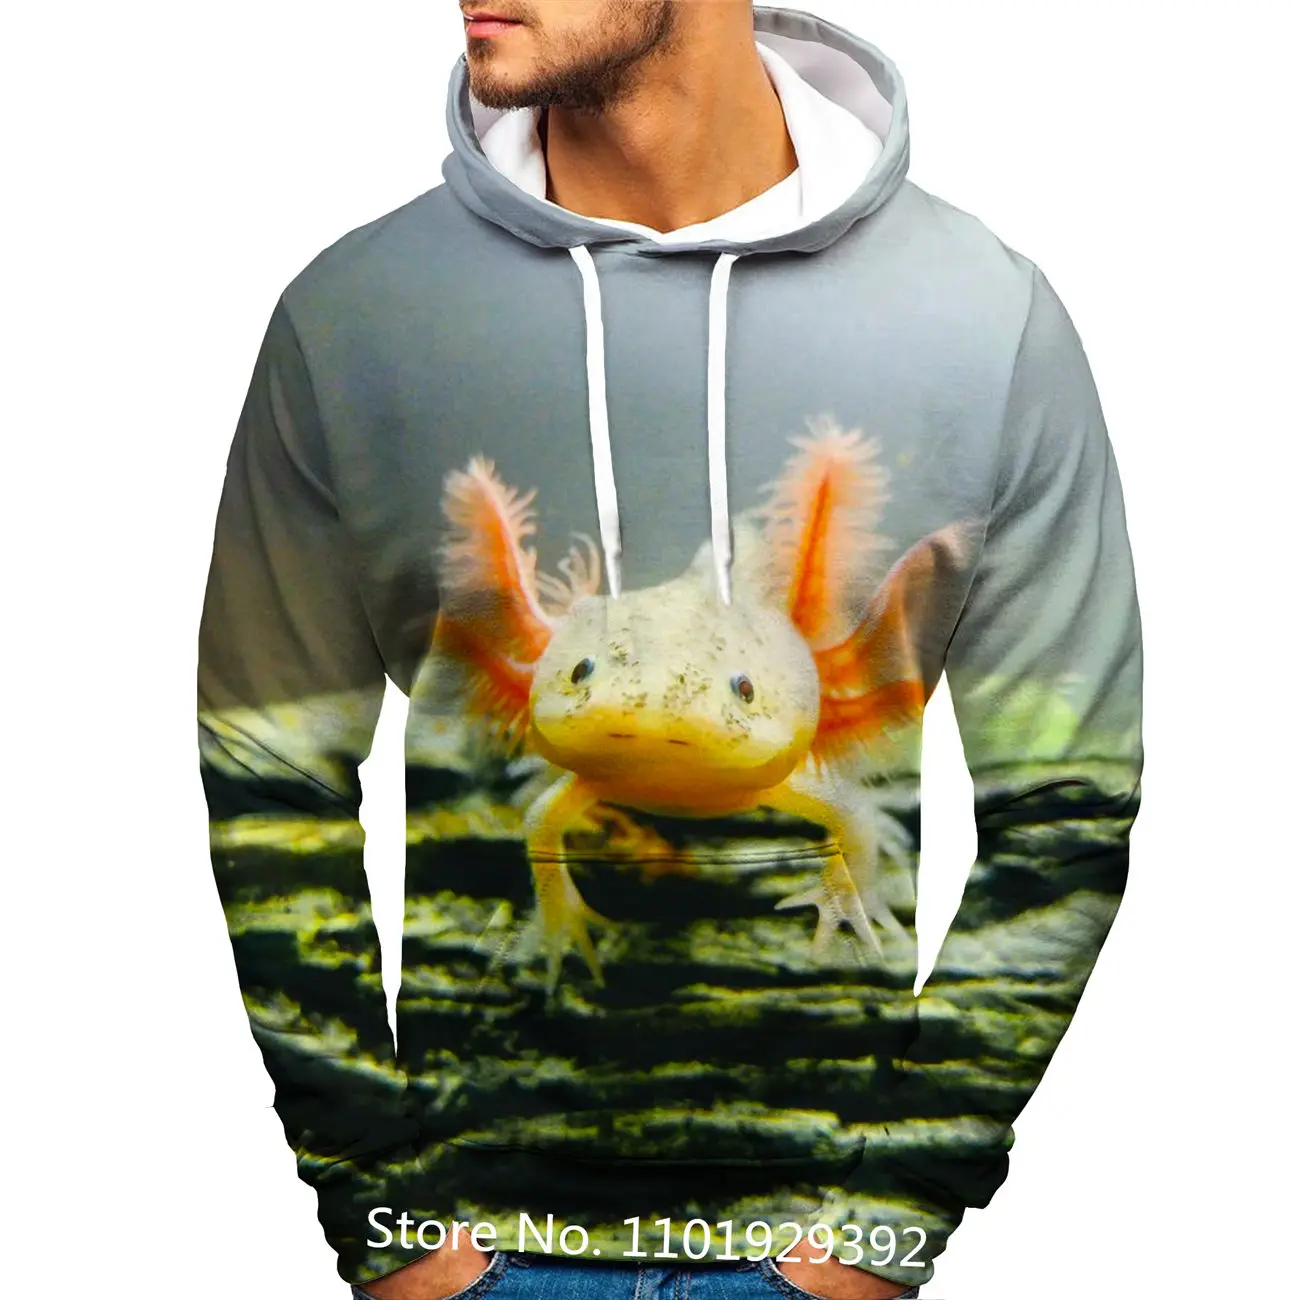 Novelty Fashion 3D Fish Hoodie Funny Hooded Sweatshir Men's and Women's Long Sleeve Pullover Shirt